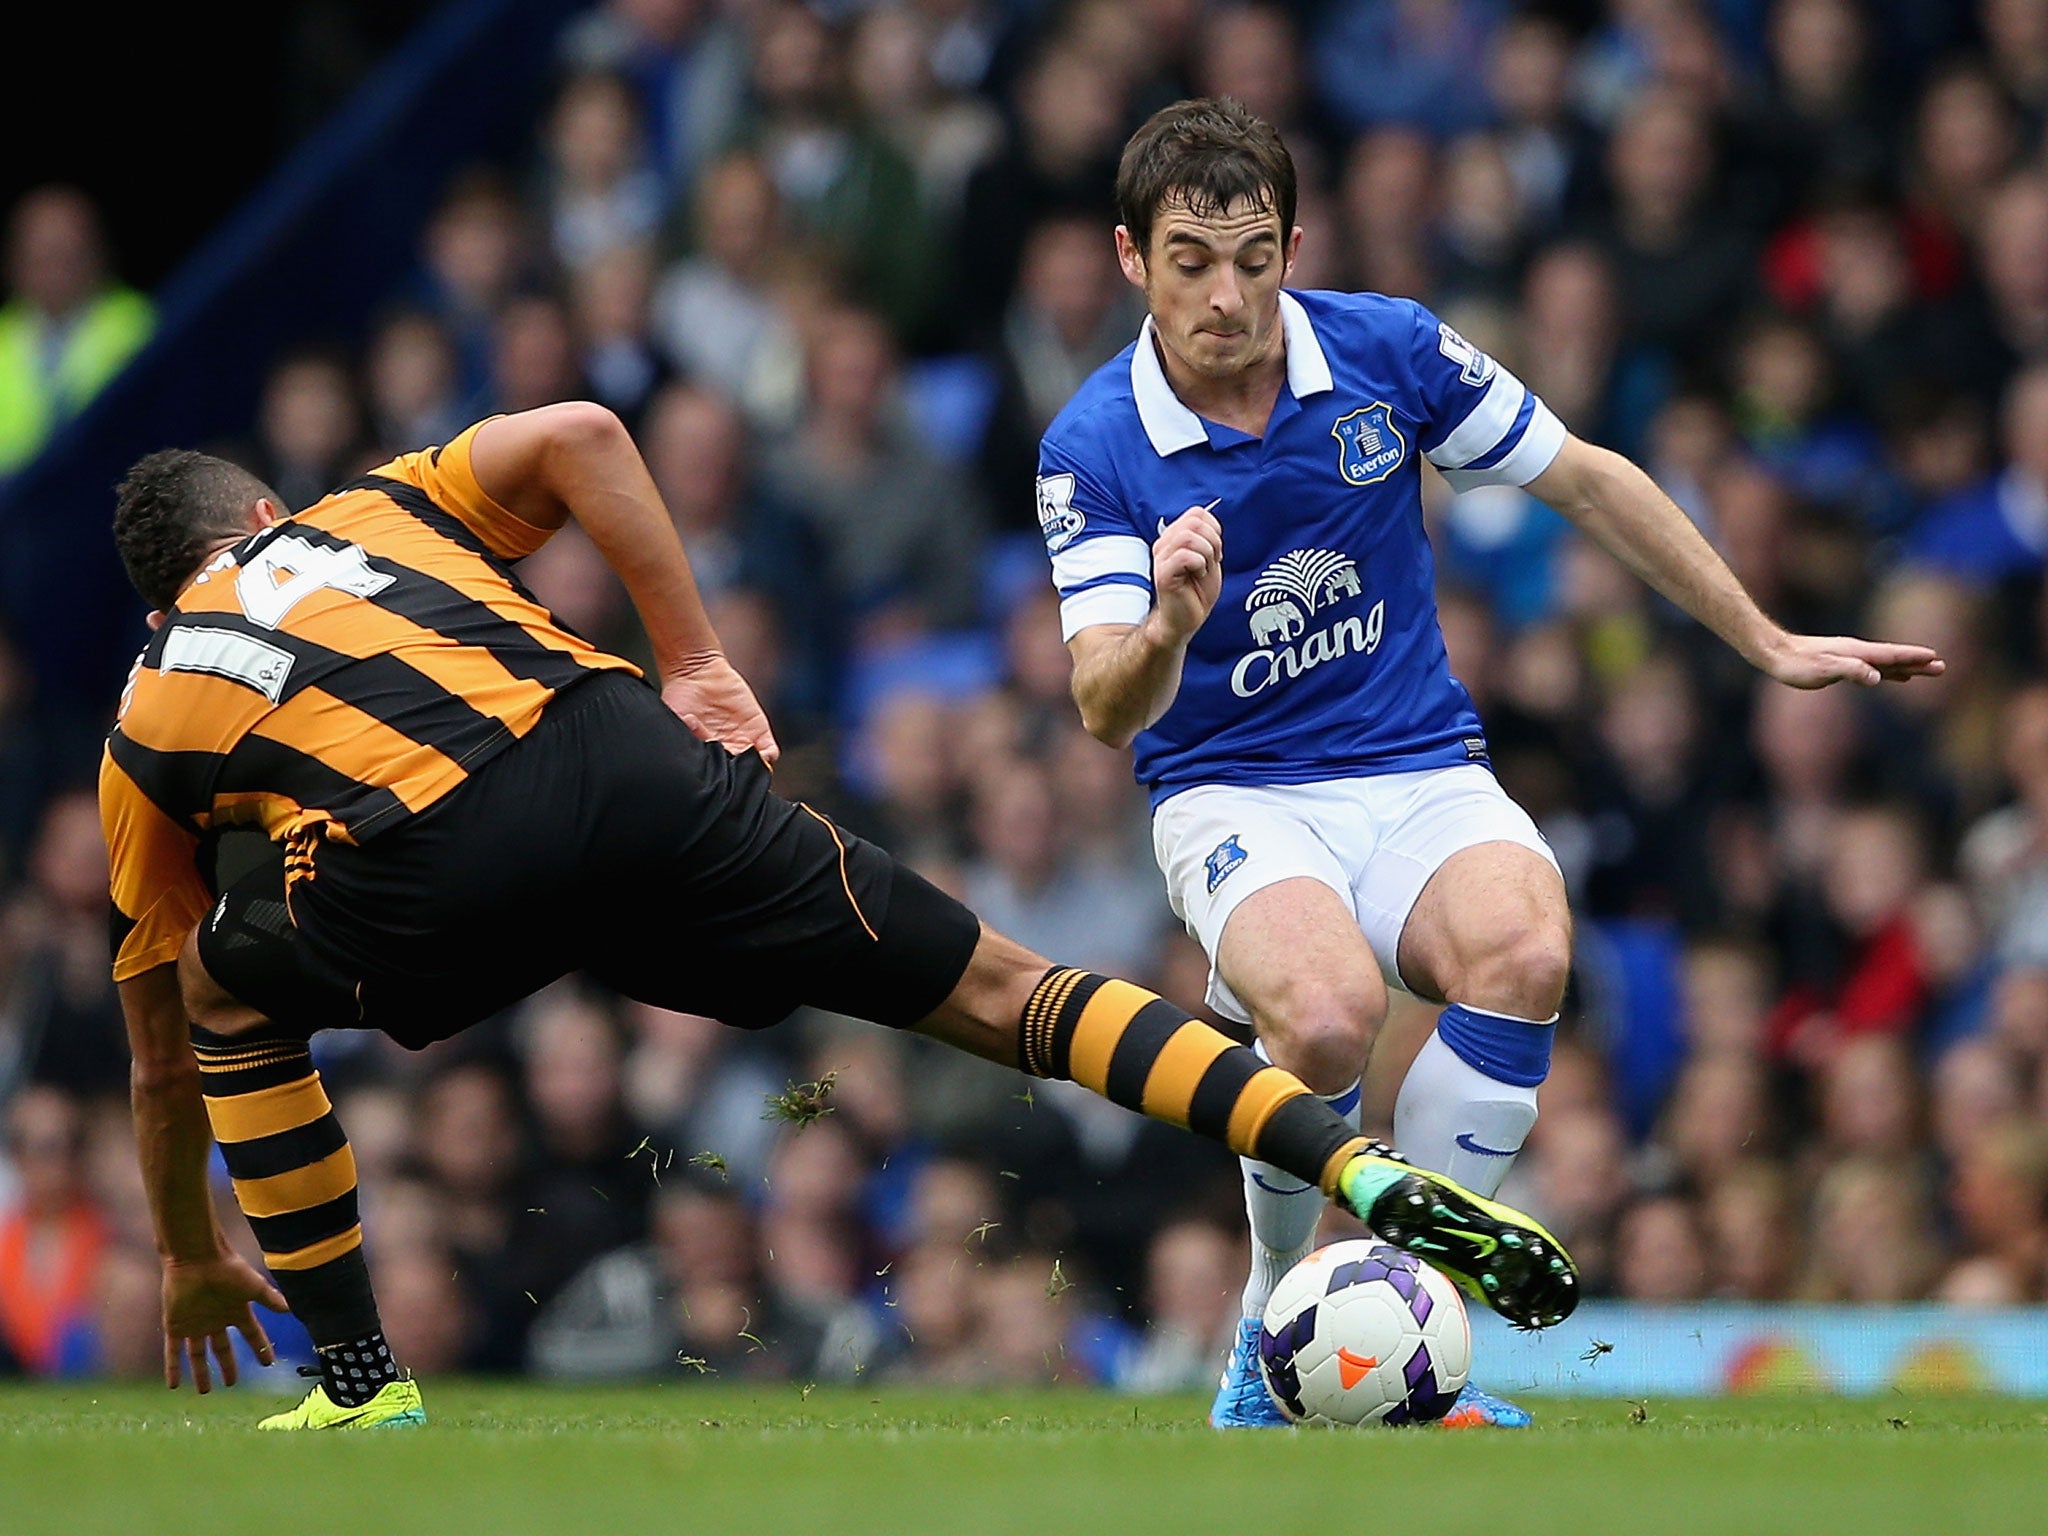 Leighton Baines is tackled by Jake Livermore